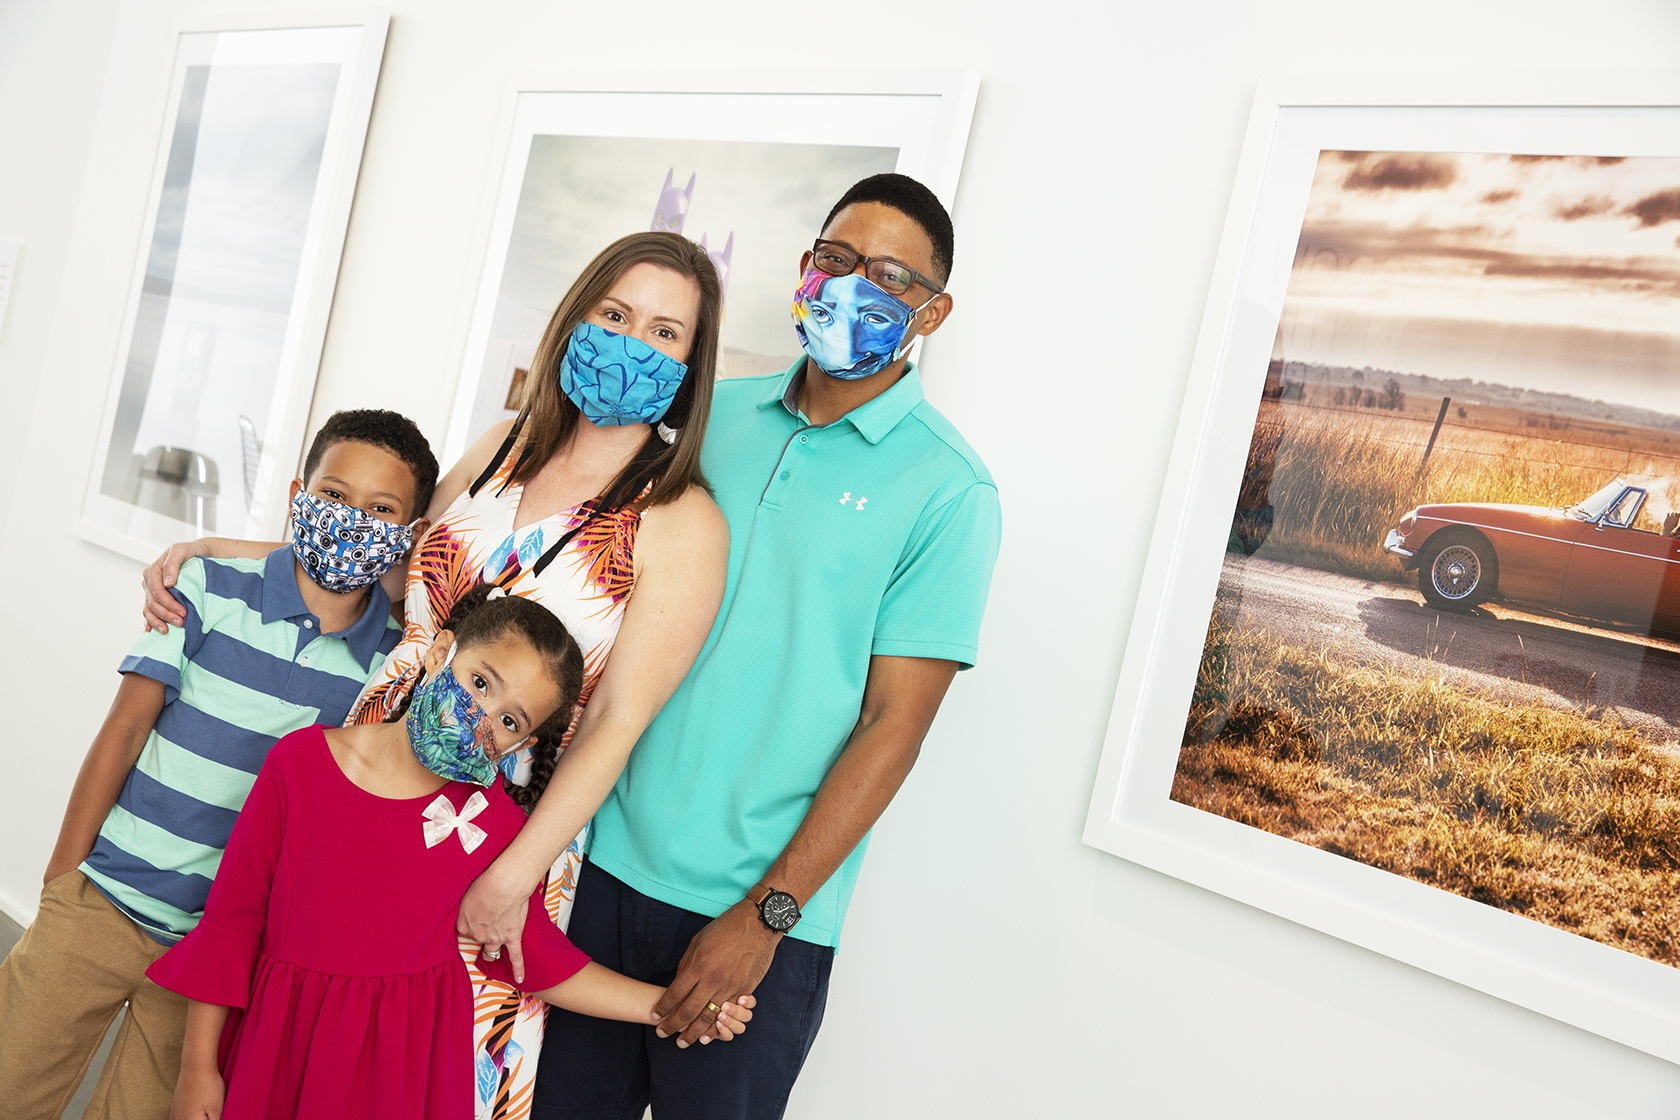 A masked family poses for a photo in an art gallery